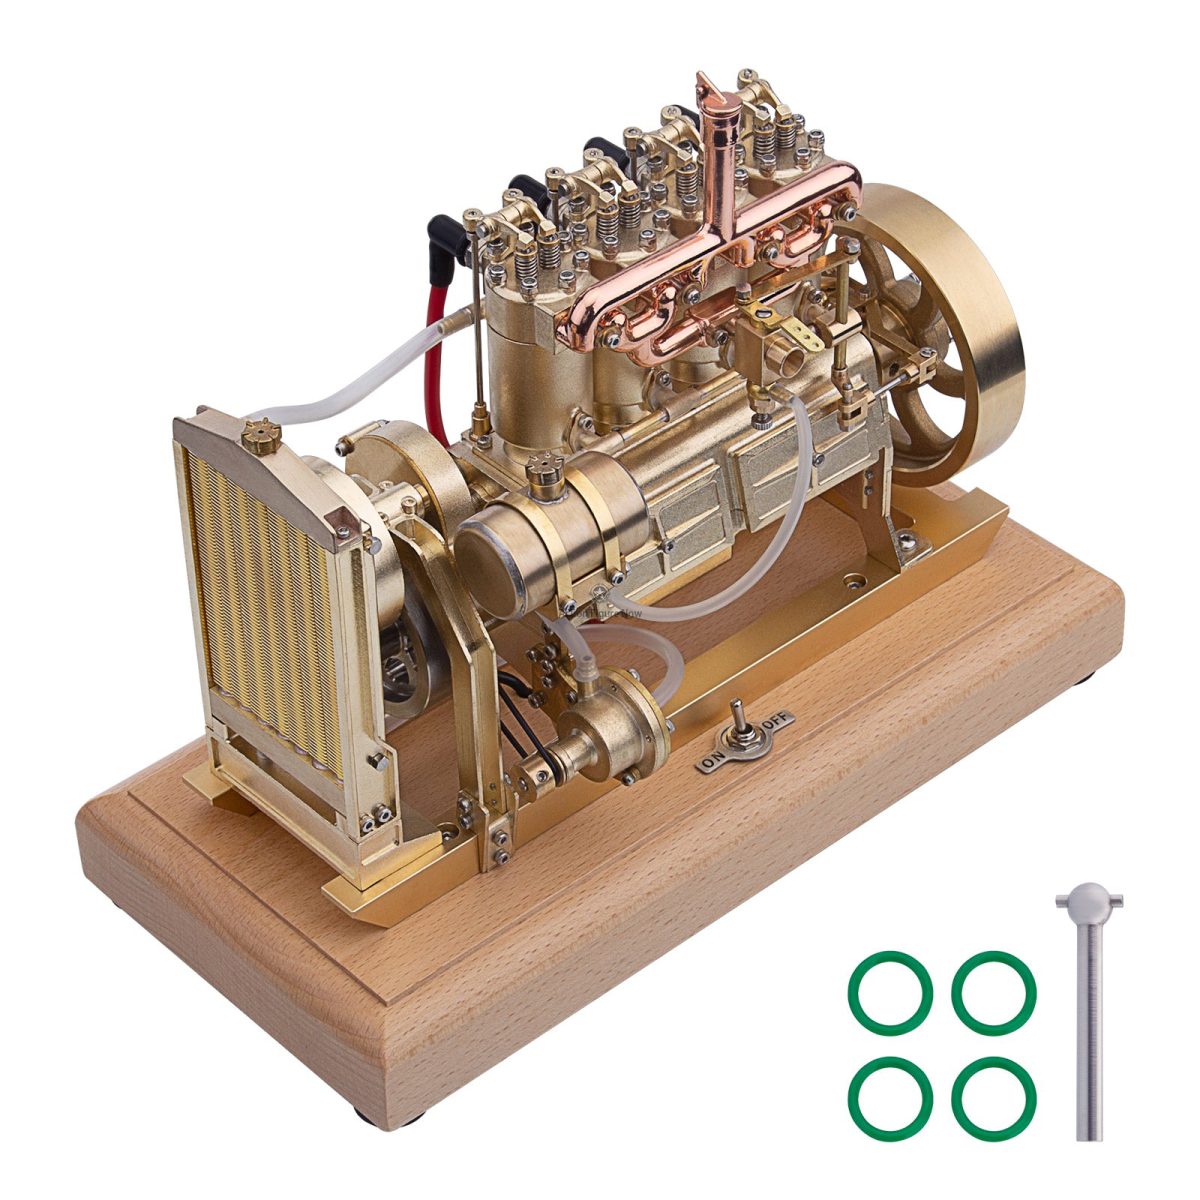 H75 12cc Vertical Single-Cylinder OHV Gas Engine Model with Mechanical Speed Limit and Complete Water Circulation Cooling System for Industrial Tractors